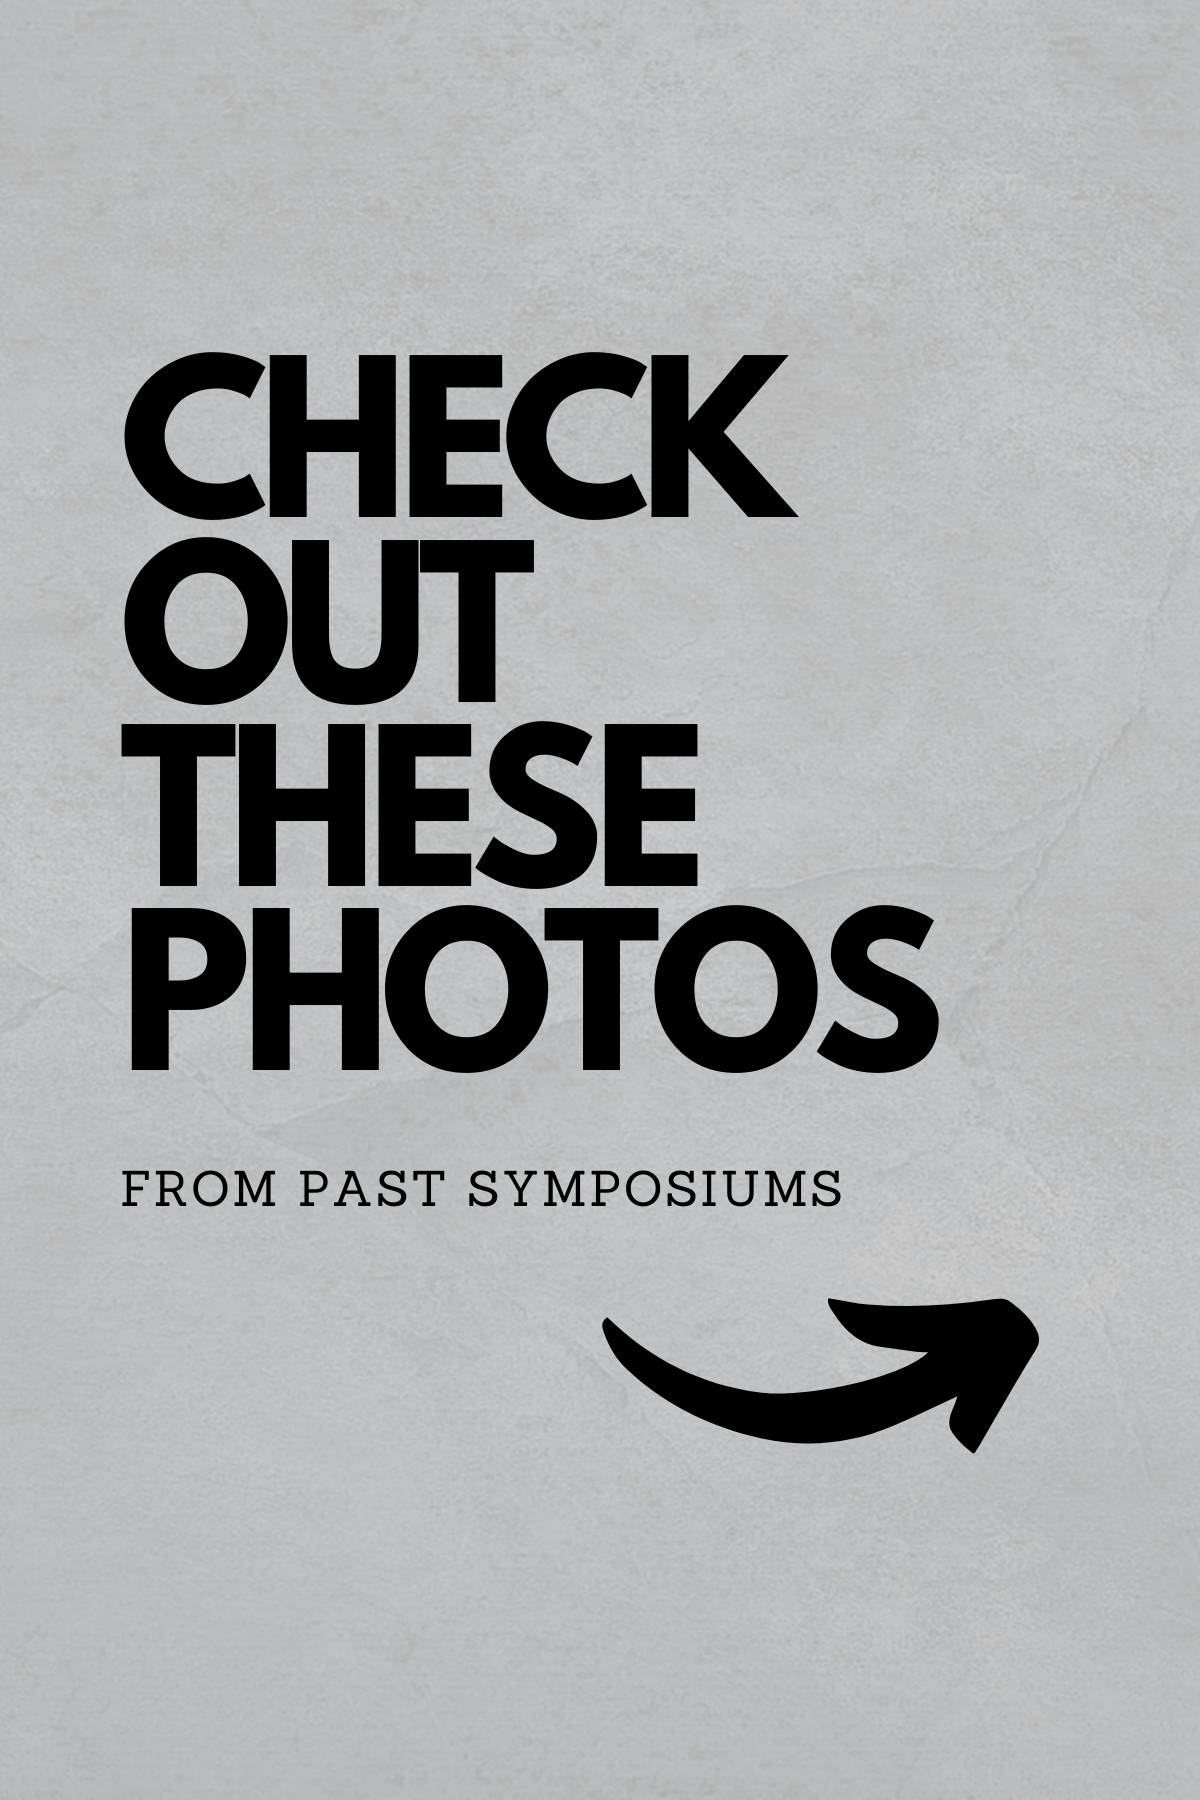 Check out these photos from past symposiums!